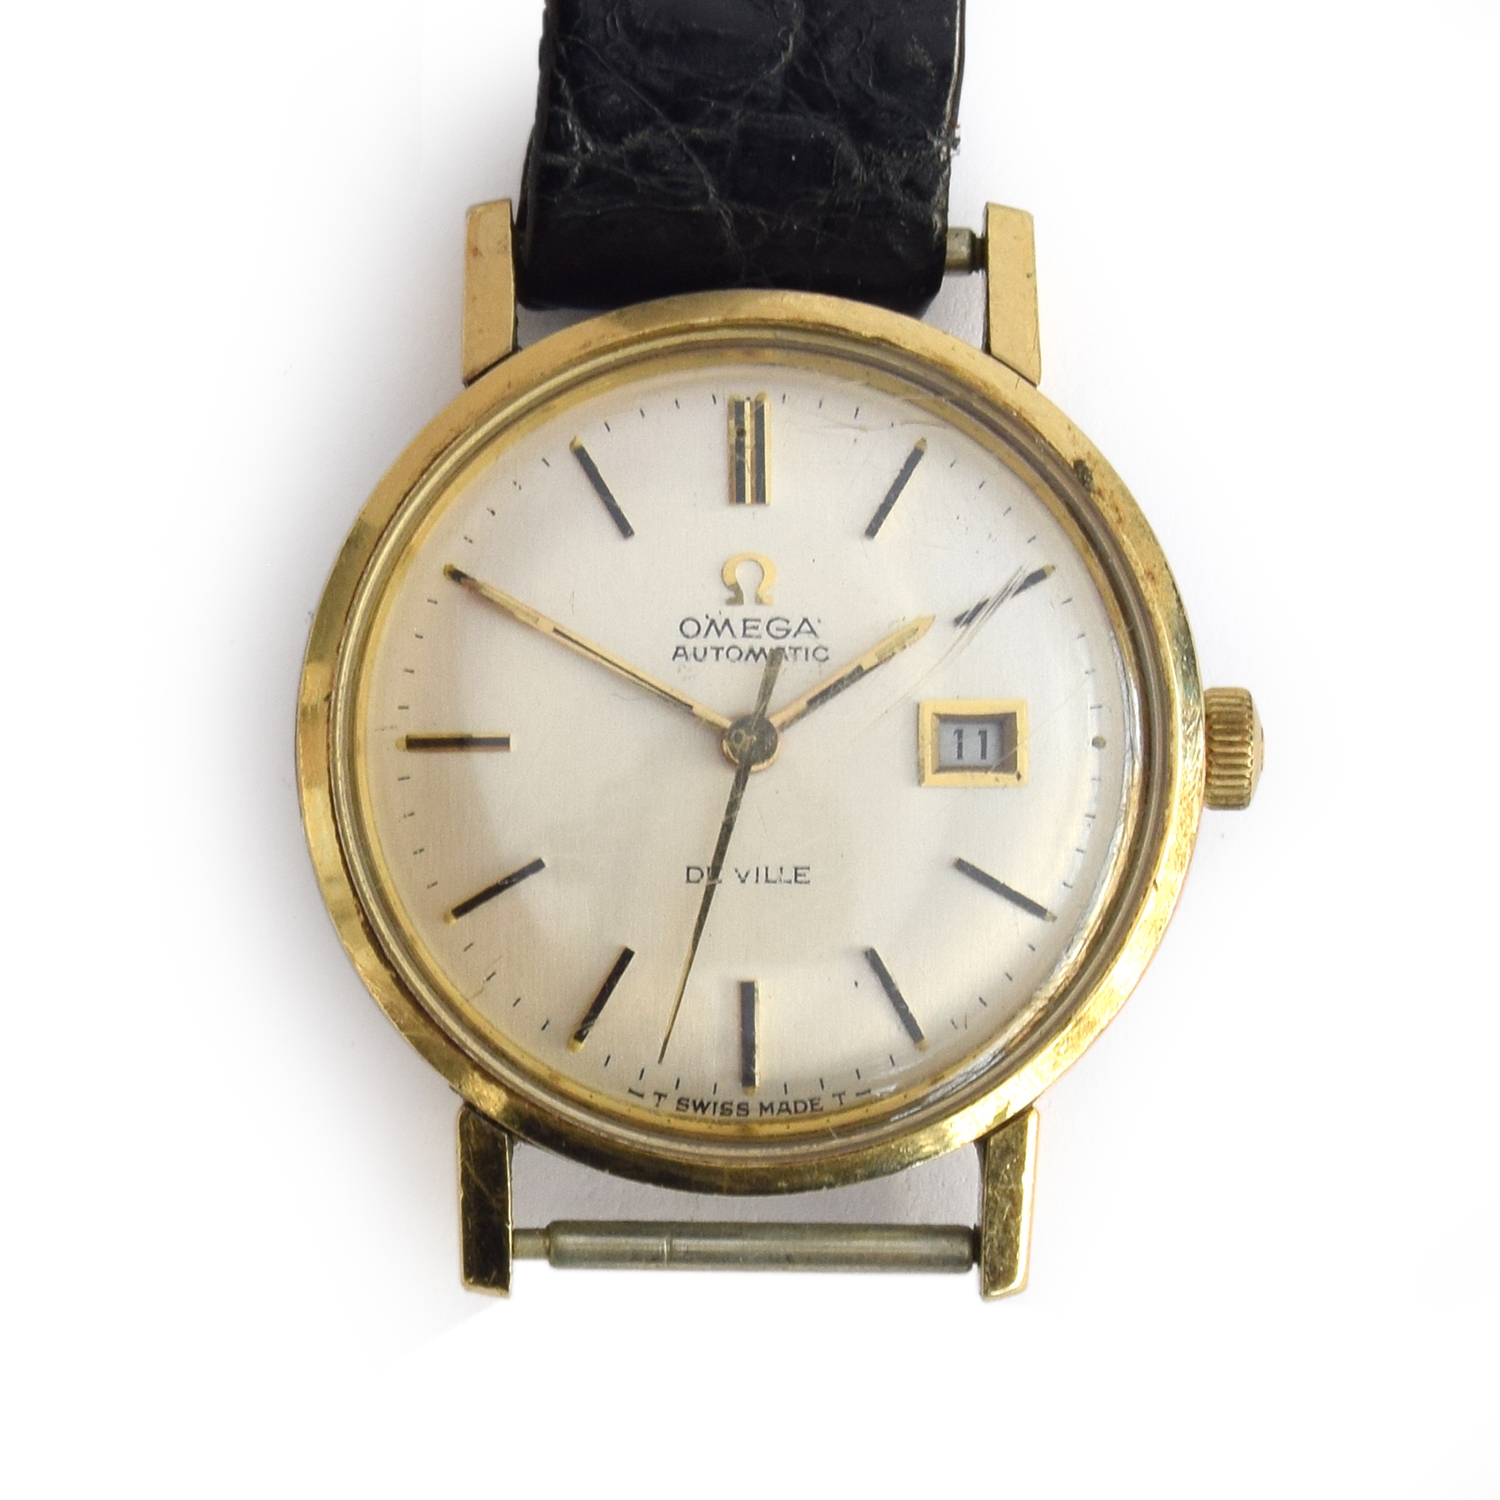 An Omega De Ville gilt and steel backed ladies wrist watch, with date aperture, the dial with raised